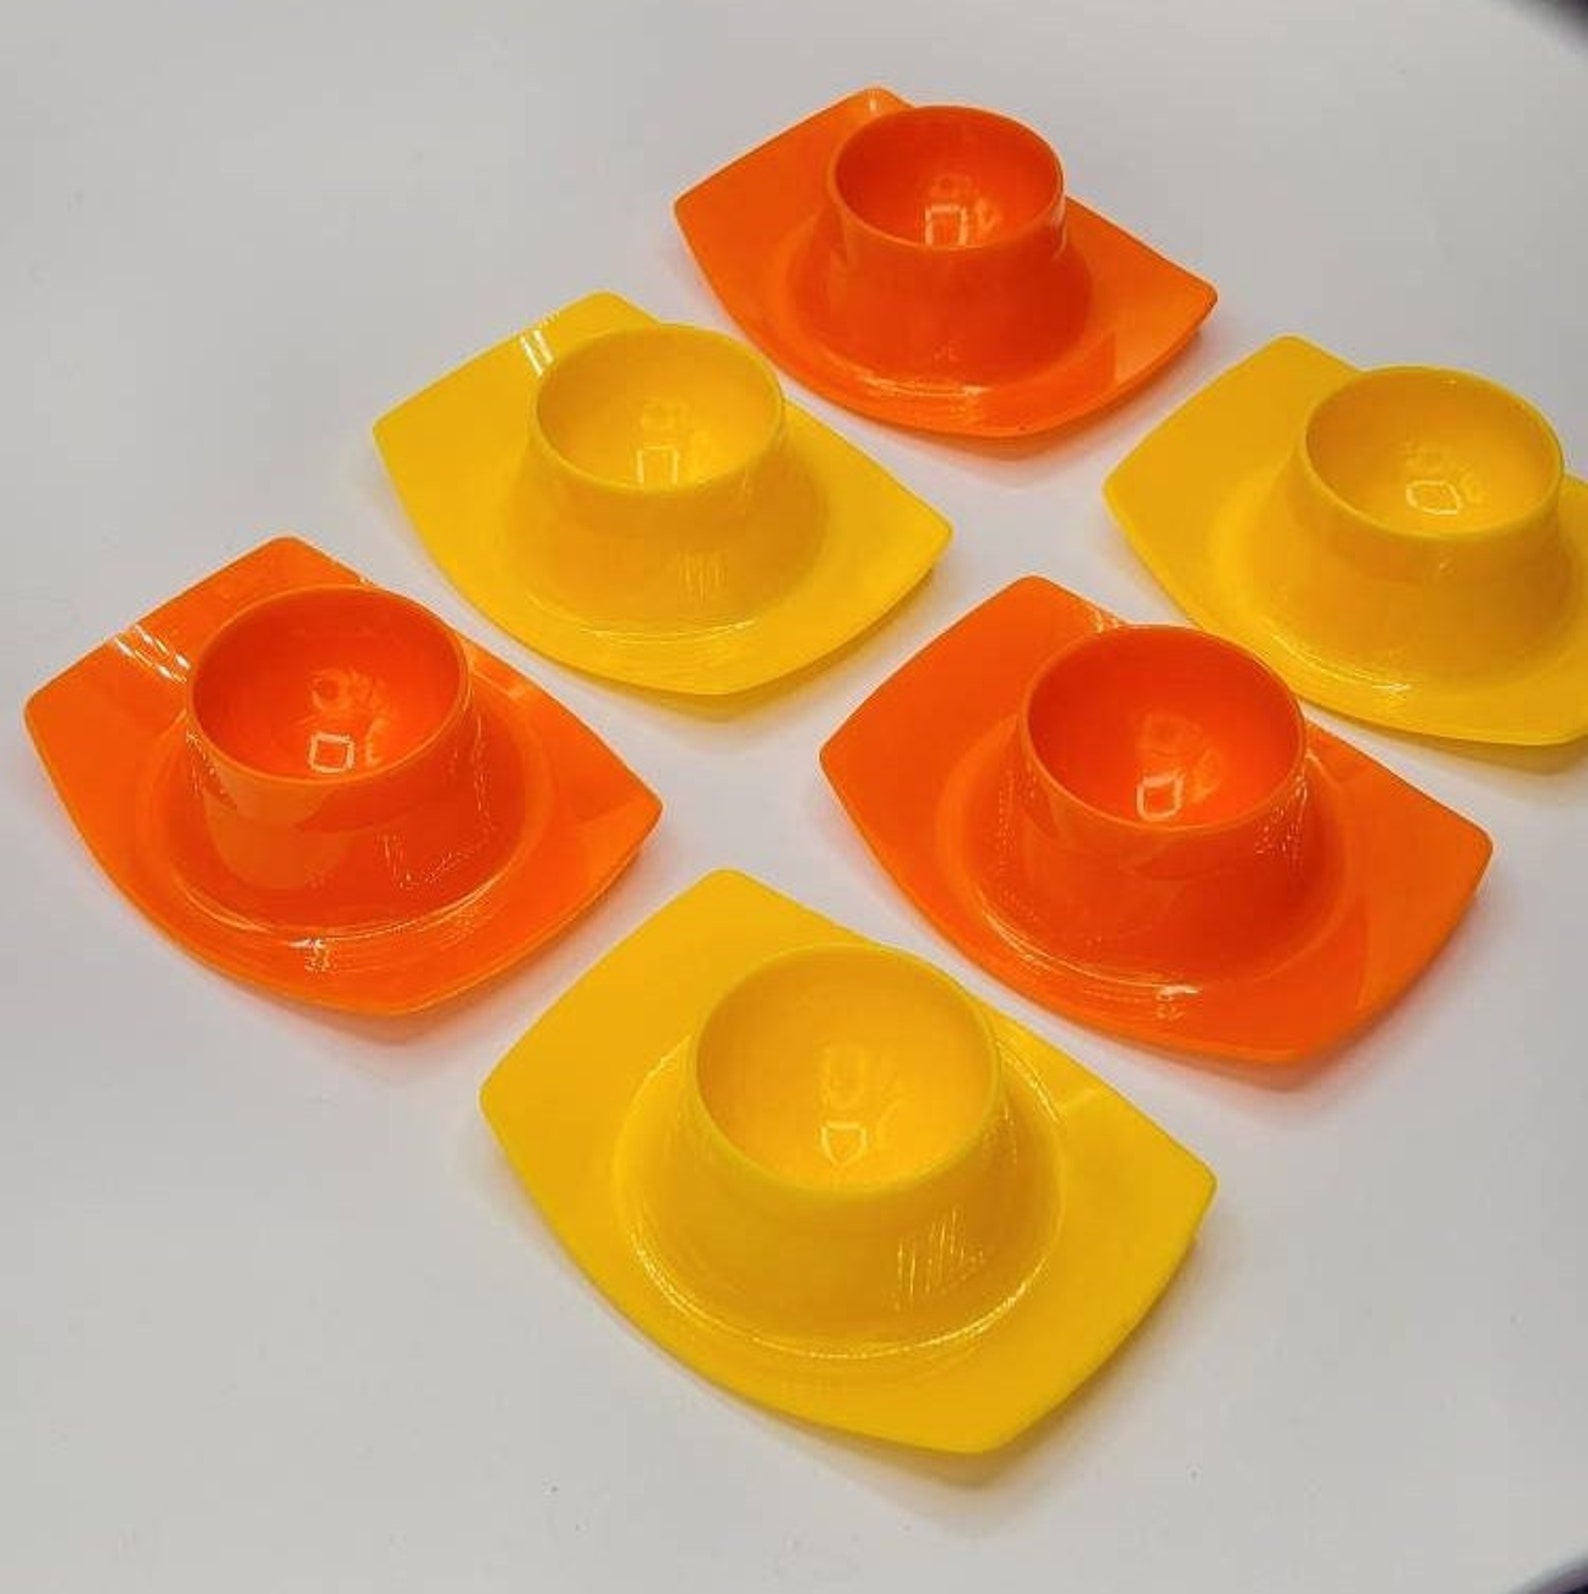 Vintage Set of 6 Egg Cups, 1970s Orange and Yellow Plastic Egg Cups from Gerda, Germany